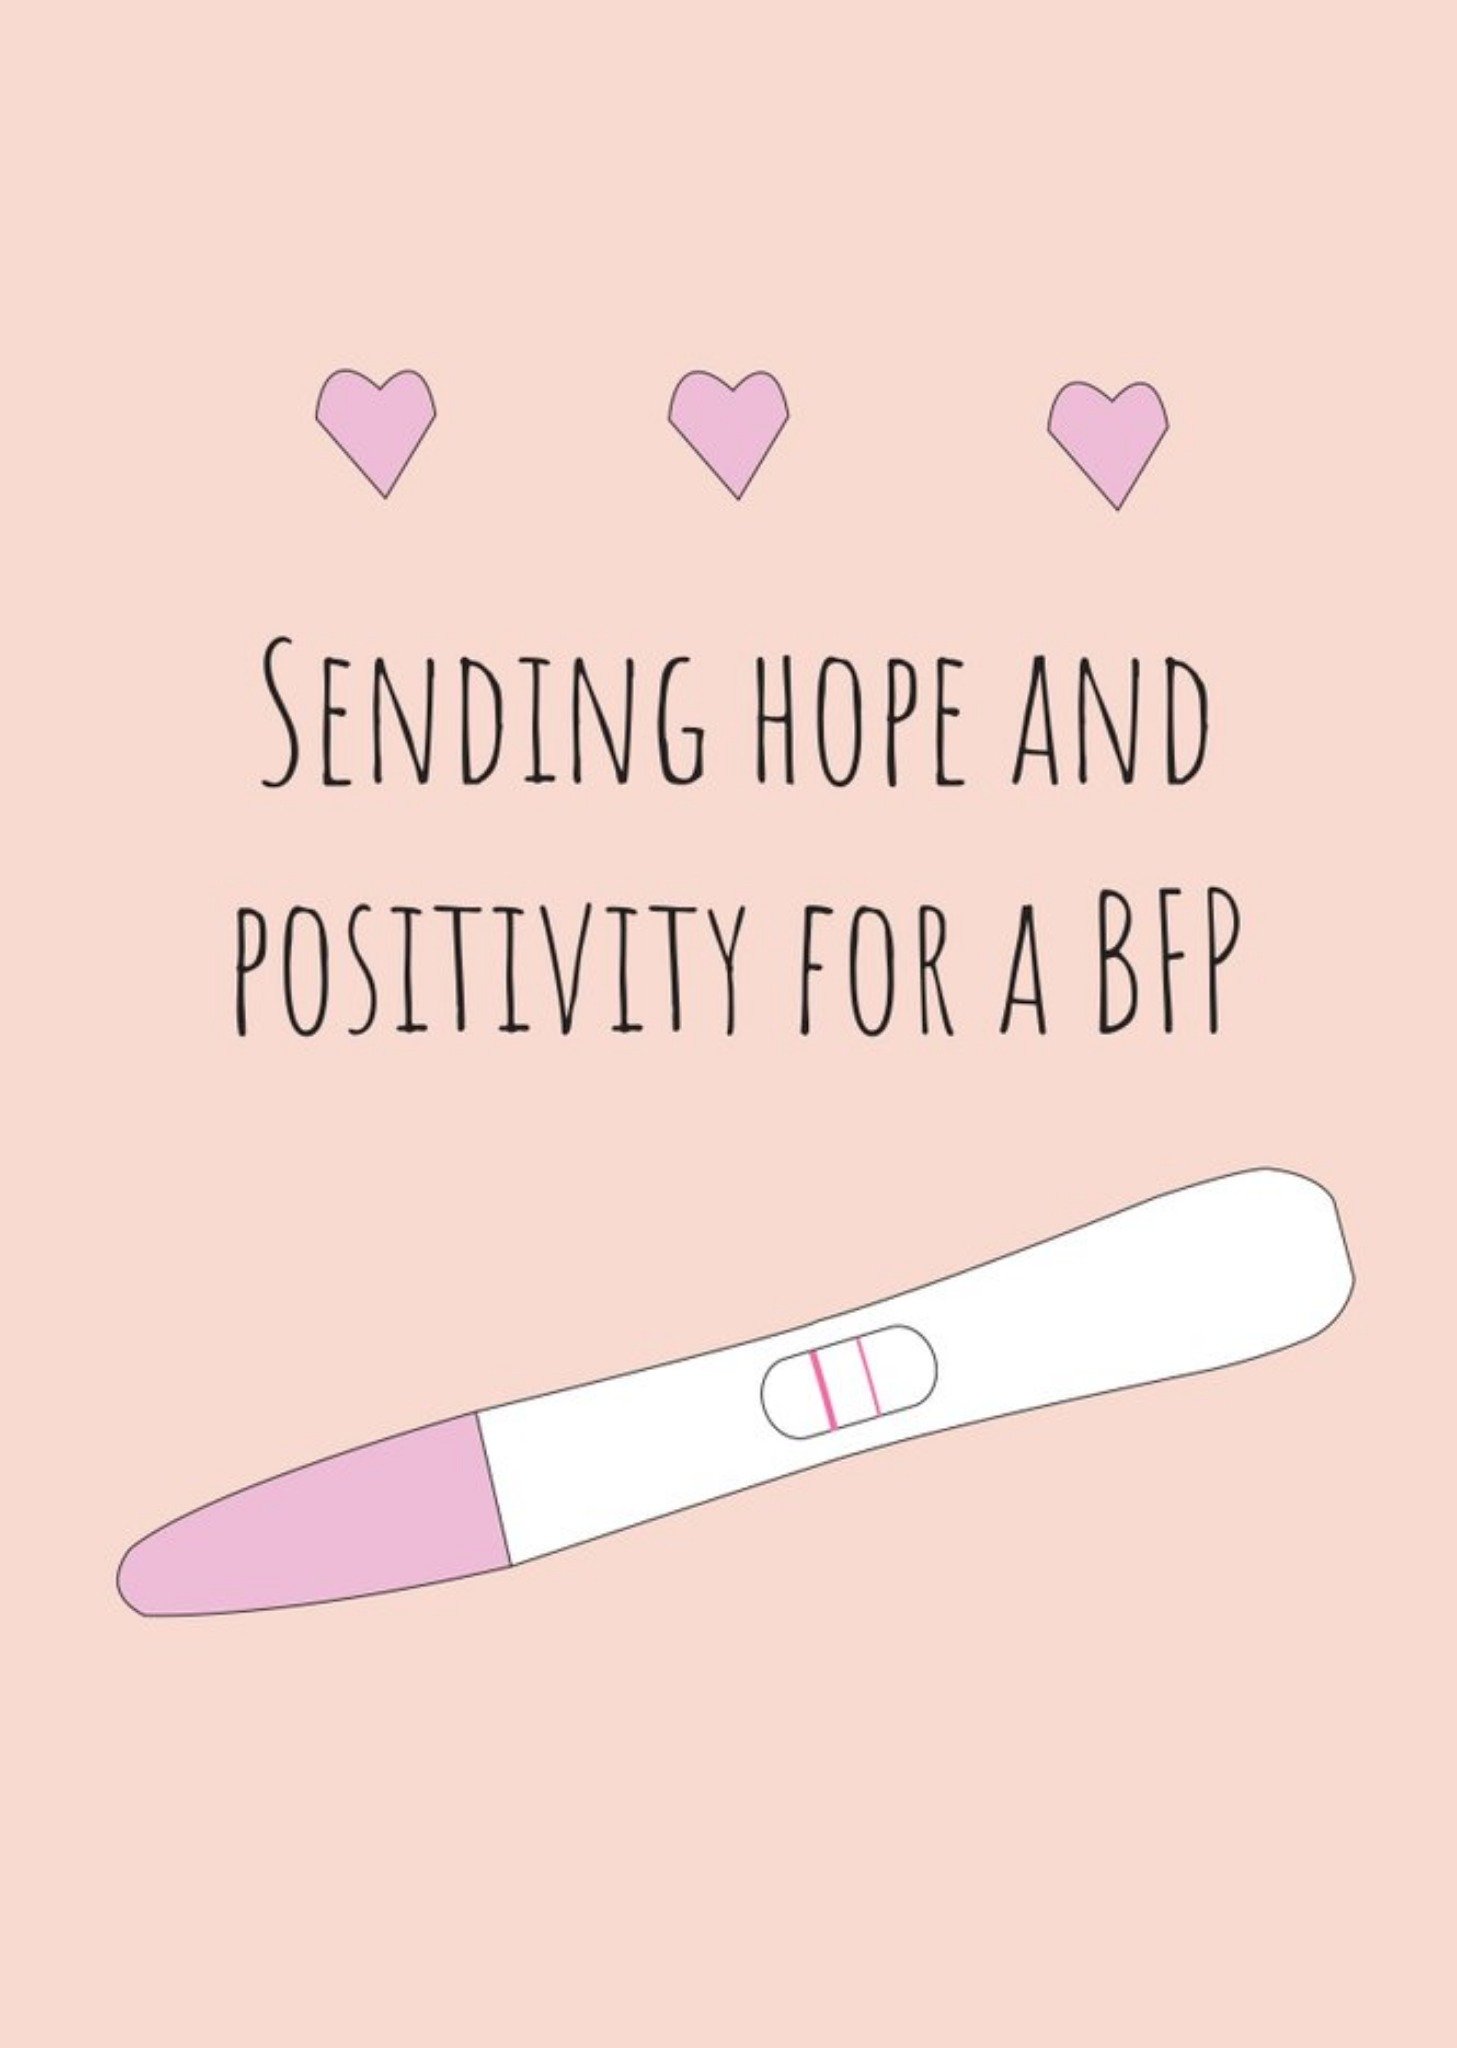 Moonpig Illustration Of A Pregnancy Test Sending Hope And Positivity For A Bfp Card Ecard